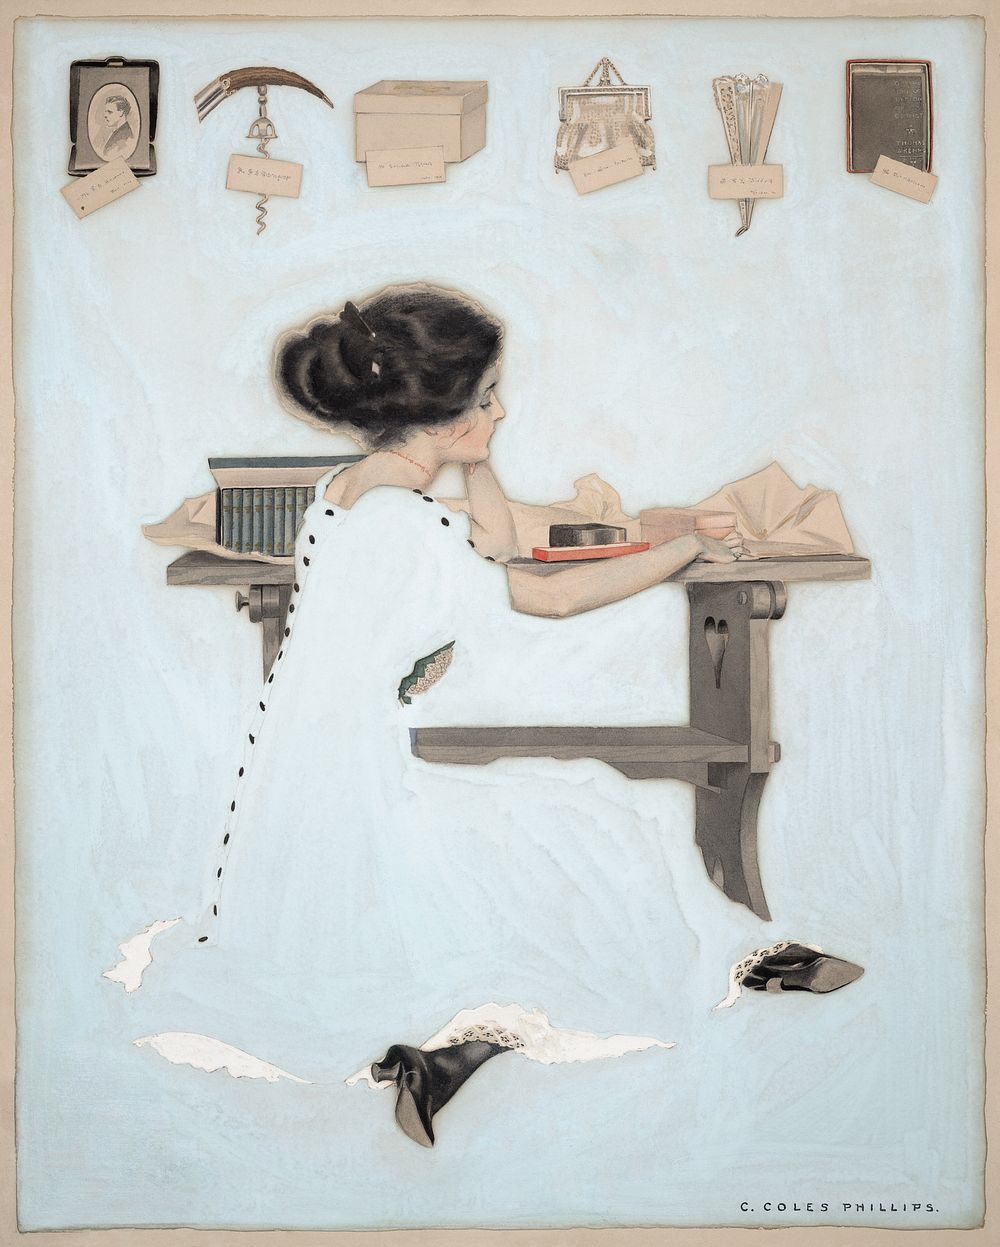 Know all men by these presents (1910) by Coles Phillips. Original public domain image from Wikimedia Commons. Digitally…